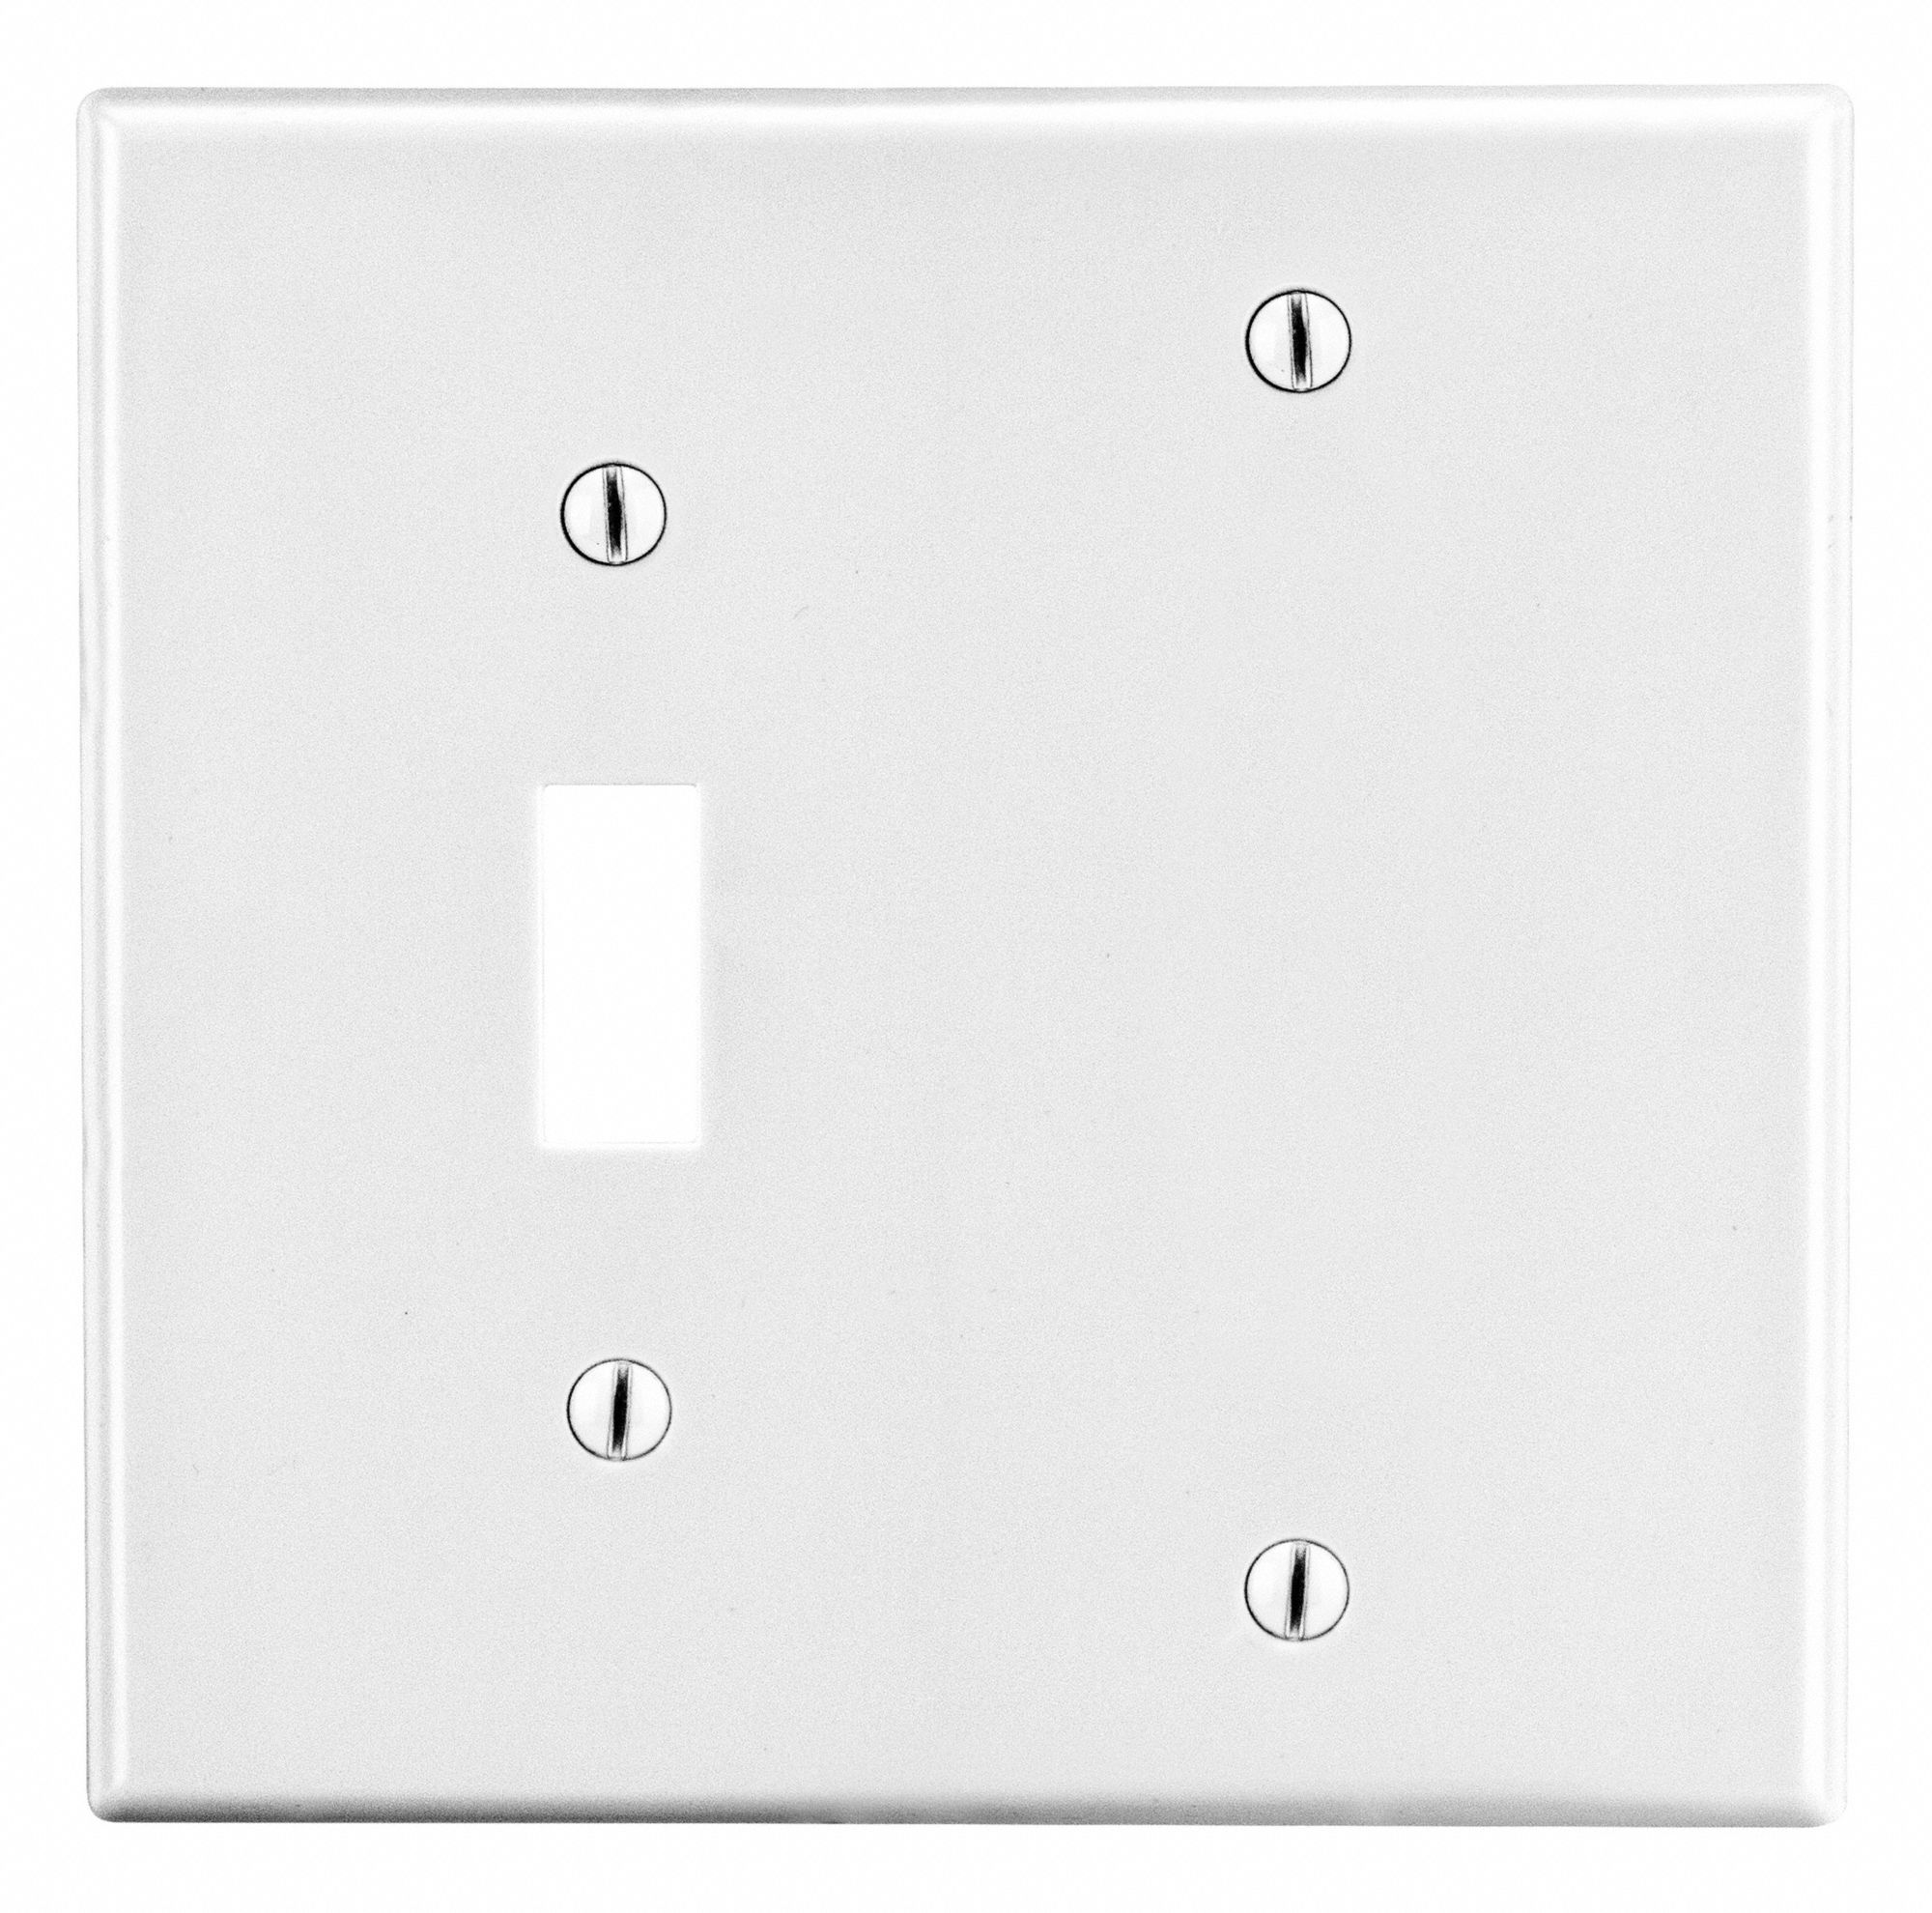 Toggle Plastic Toggle Switchblank Wall Plate 55kt94p113w Grainger